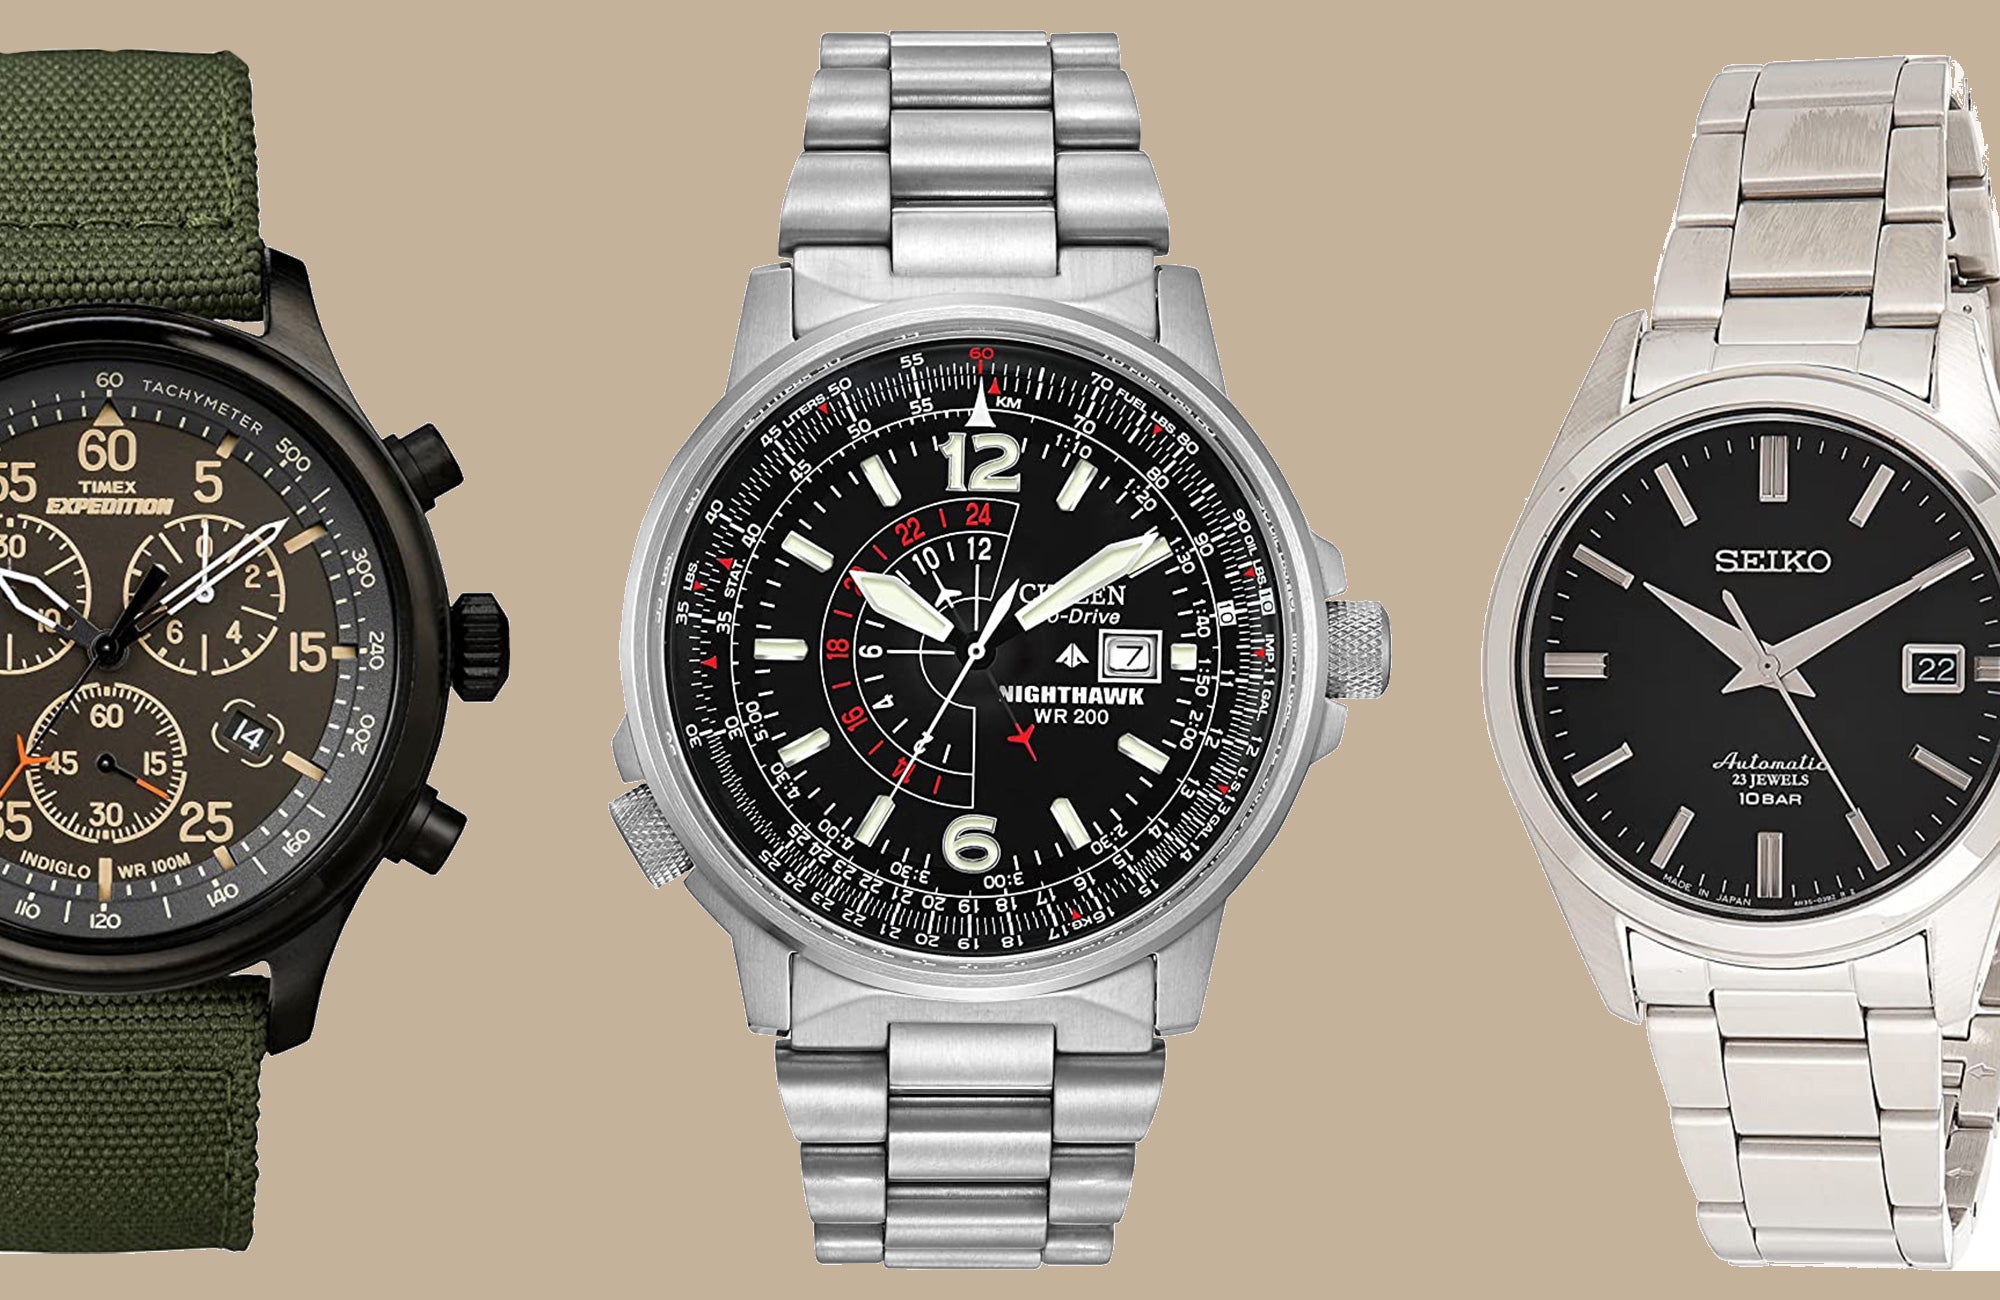 Save up to 60 percent on Timex and Seiko watches | Popular Science